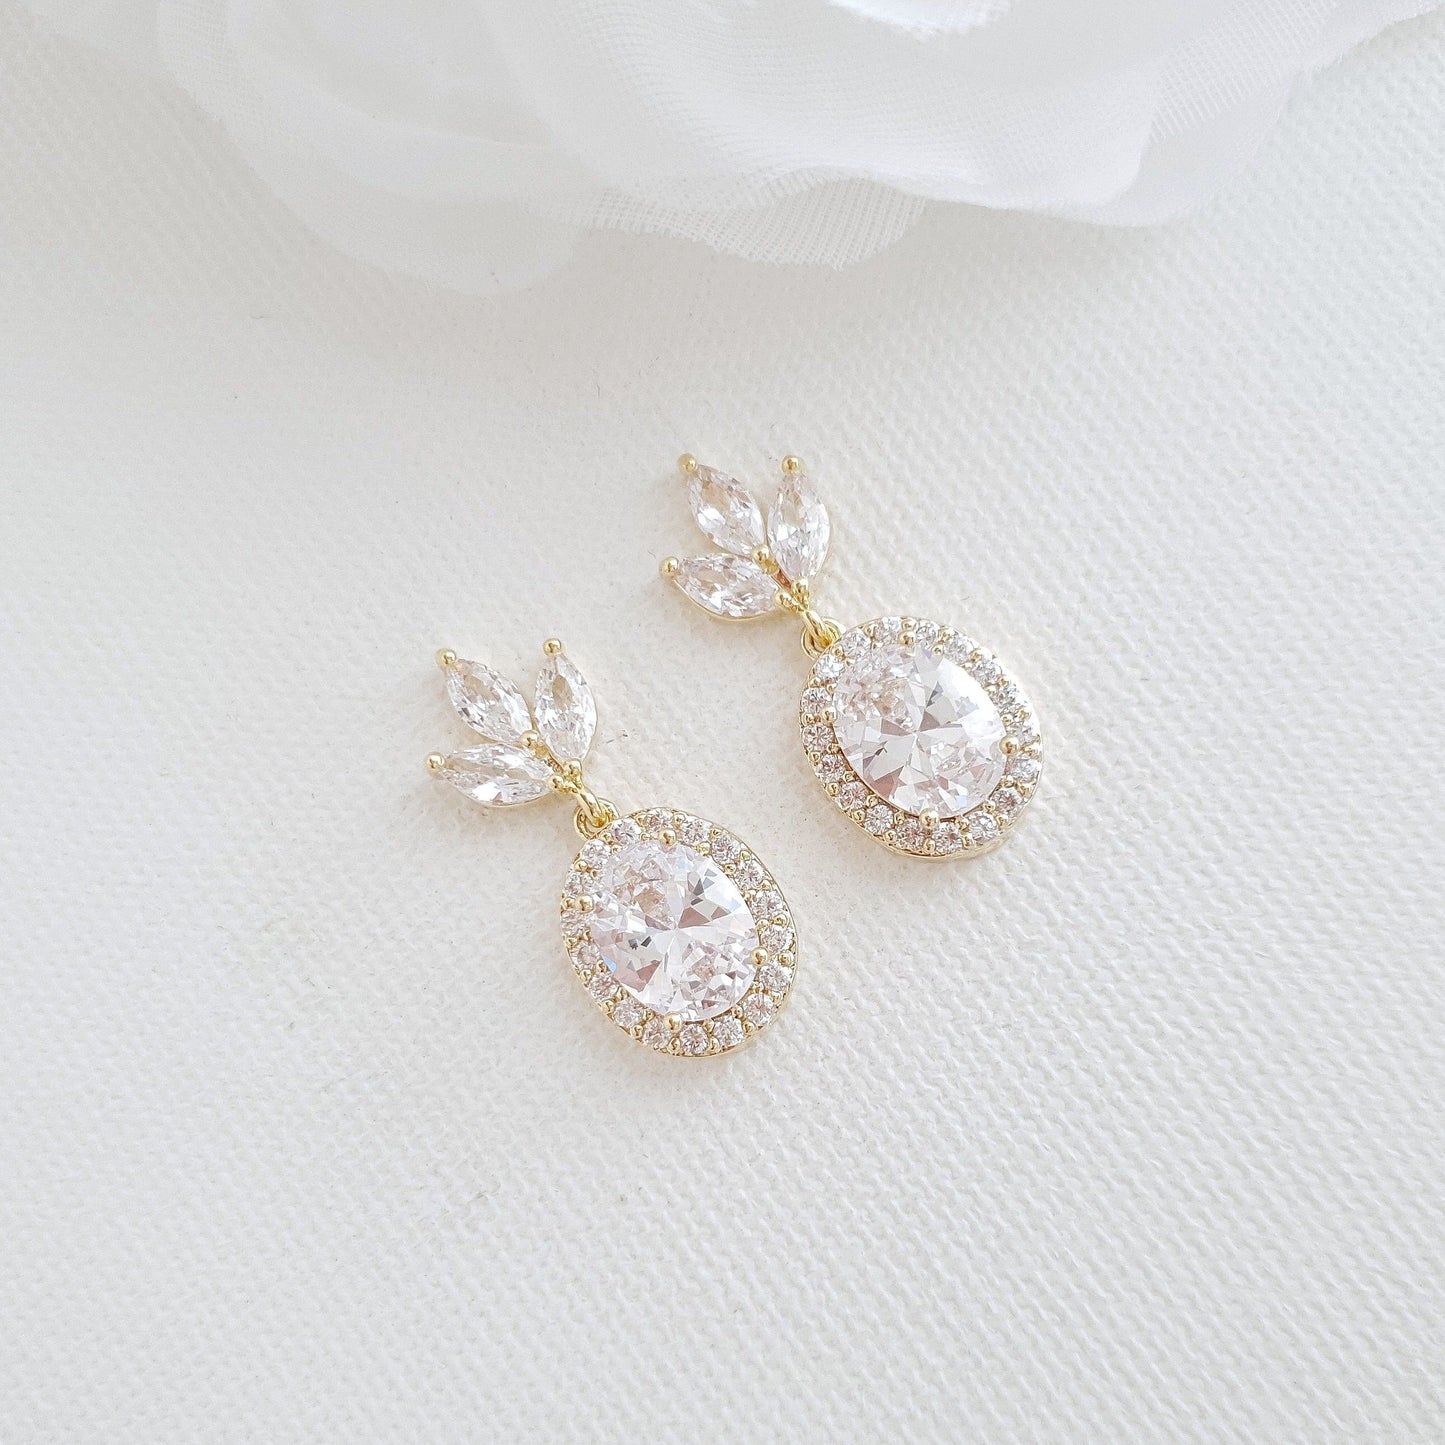 Small Bridal Earrings With Oval Crystals & Rose Gold- Emily - PoetryDesigns